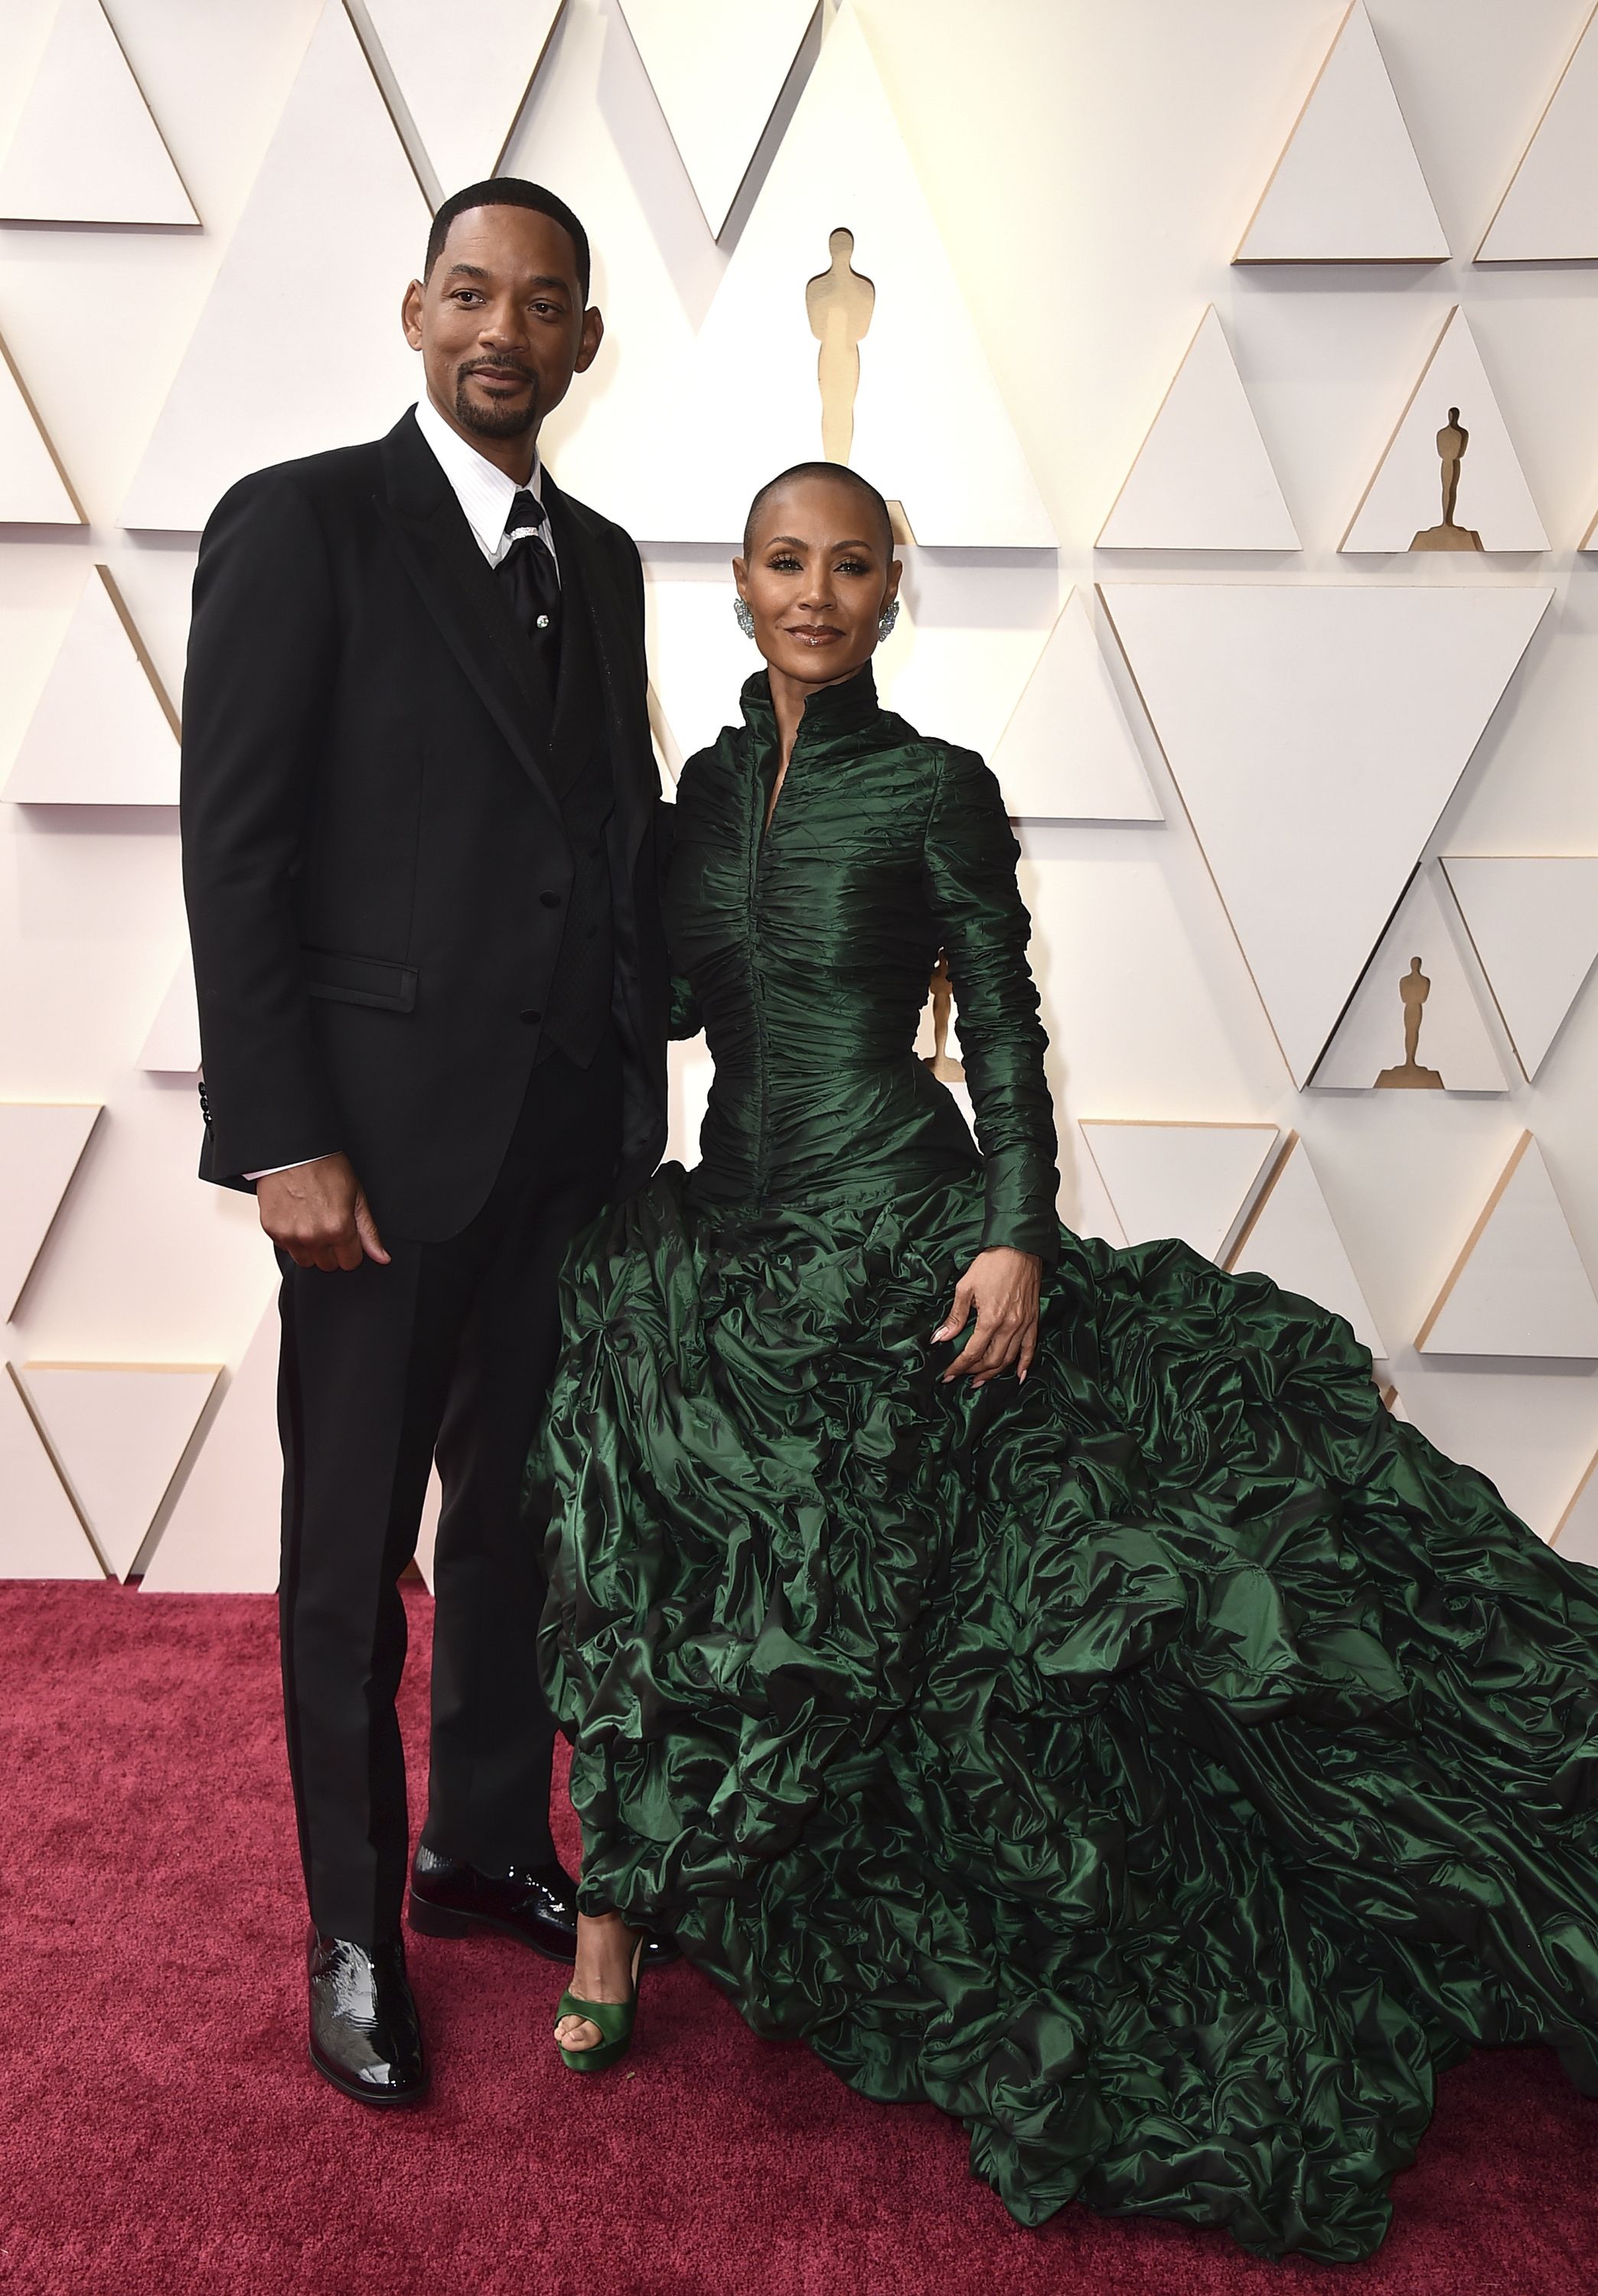 Photos: Scenes from the red carpet at the 2022 Oscars